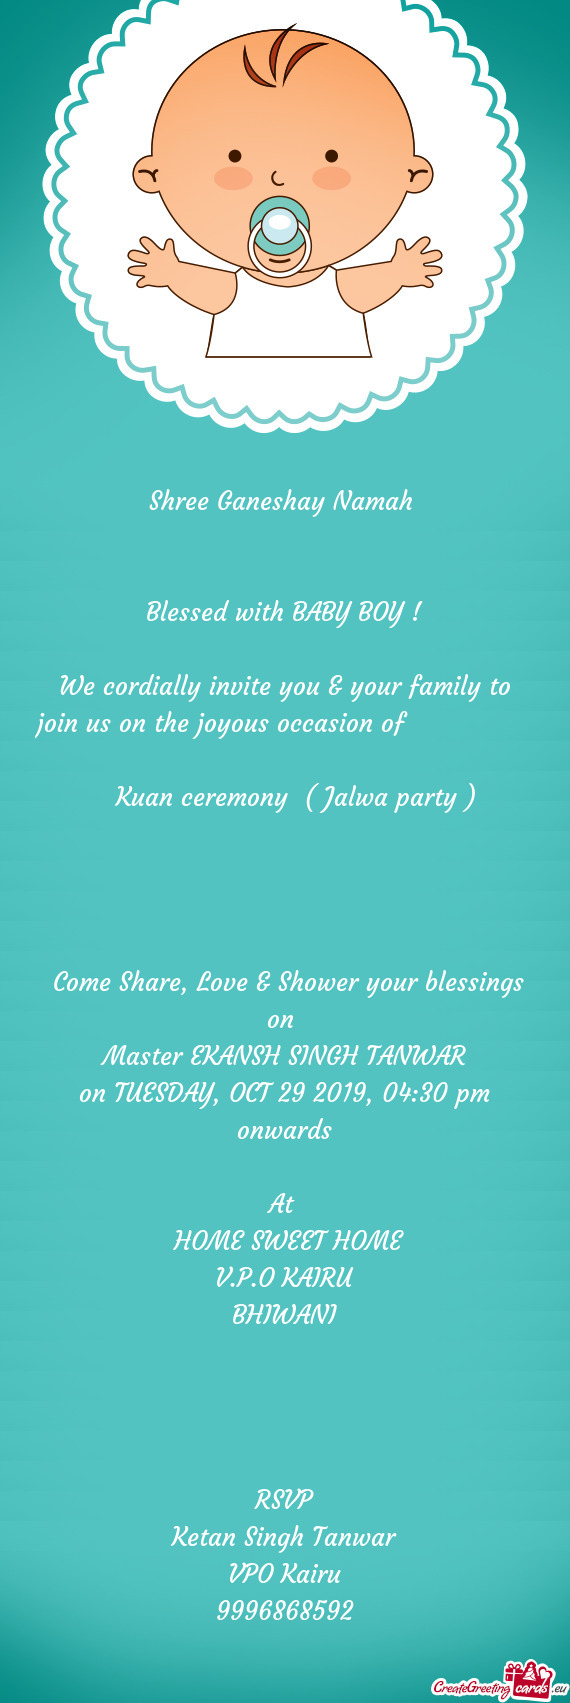 We cordially invite you & your family to join us on the joyous occasion of      Kuan